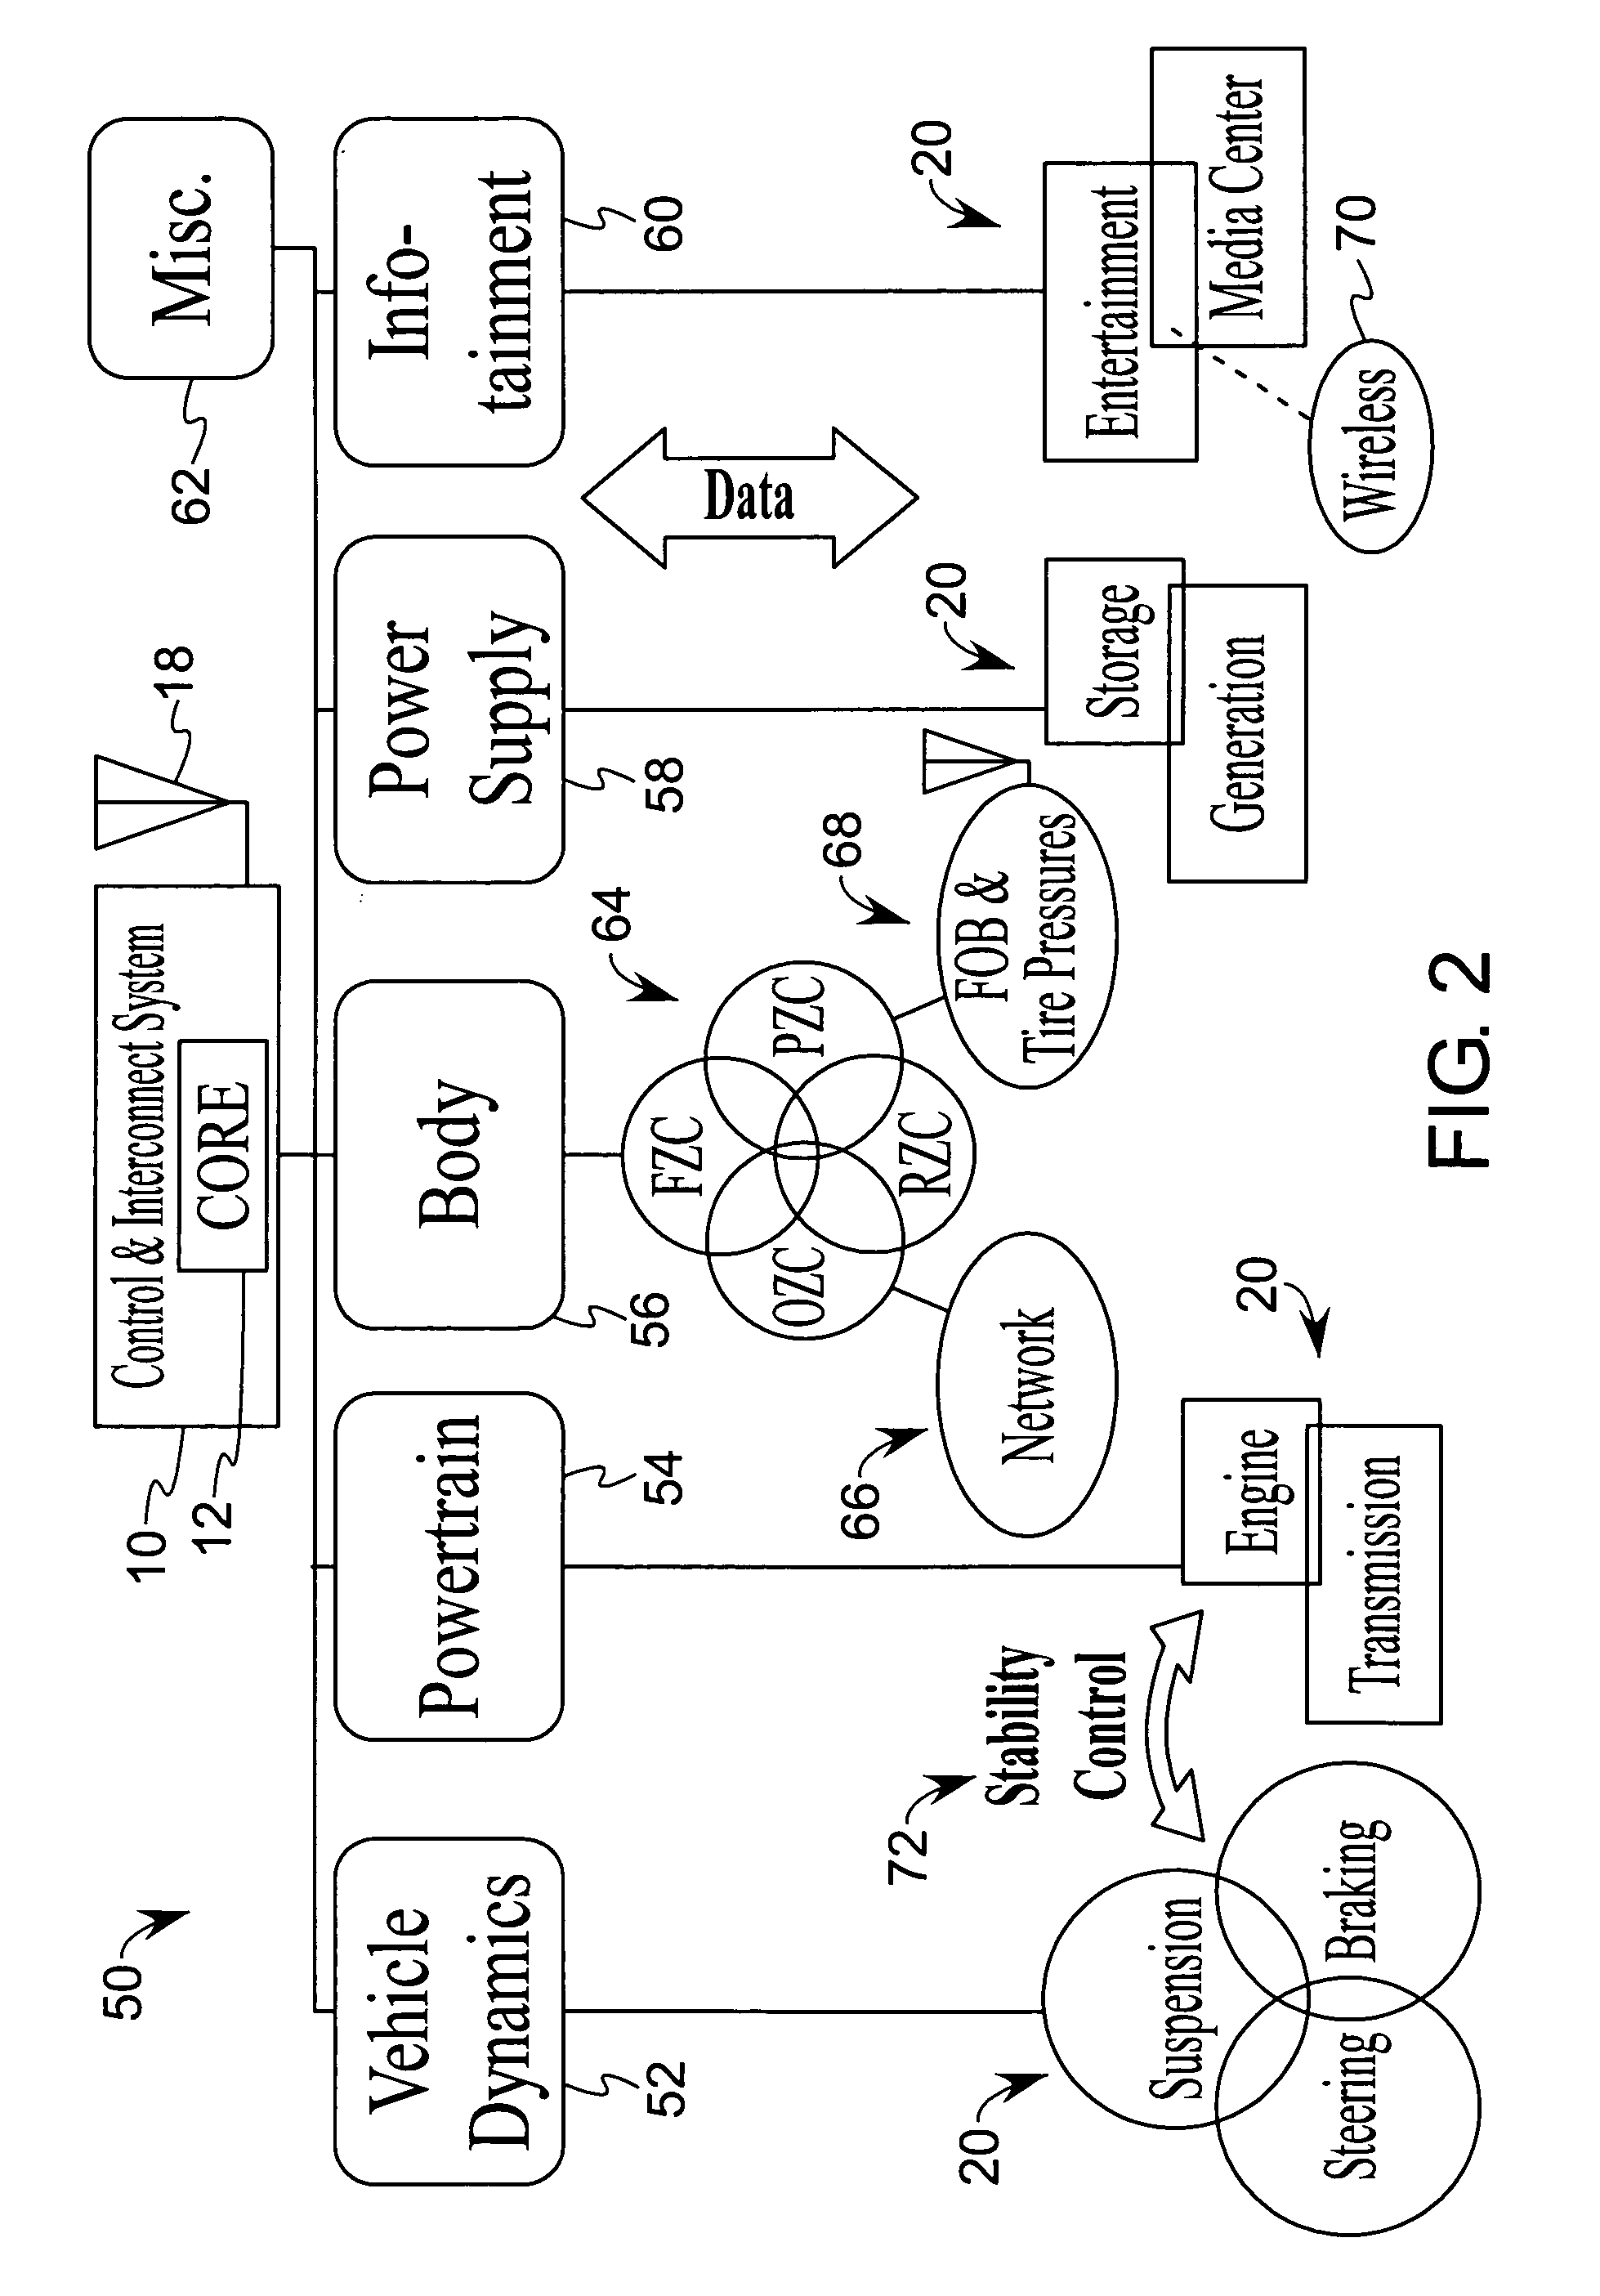 Systems and methods for implementing a vehicle control and interconnection system